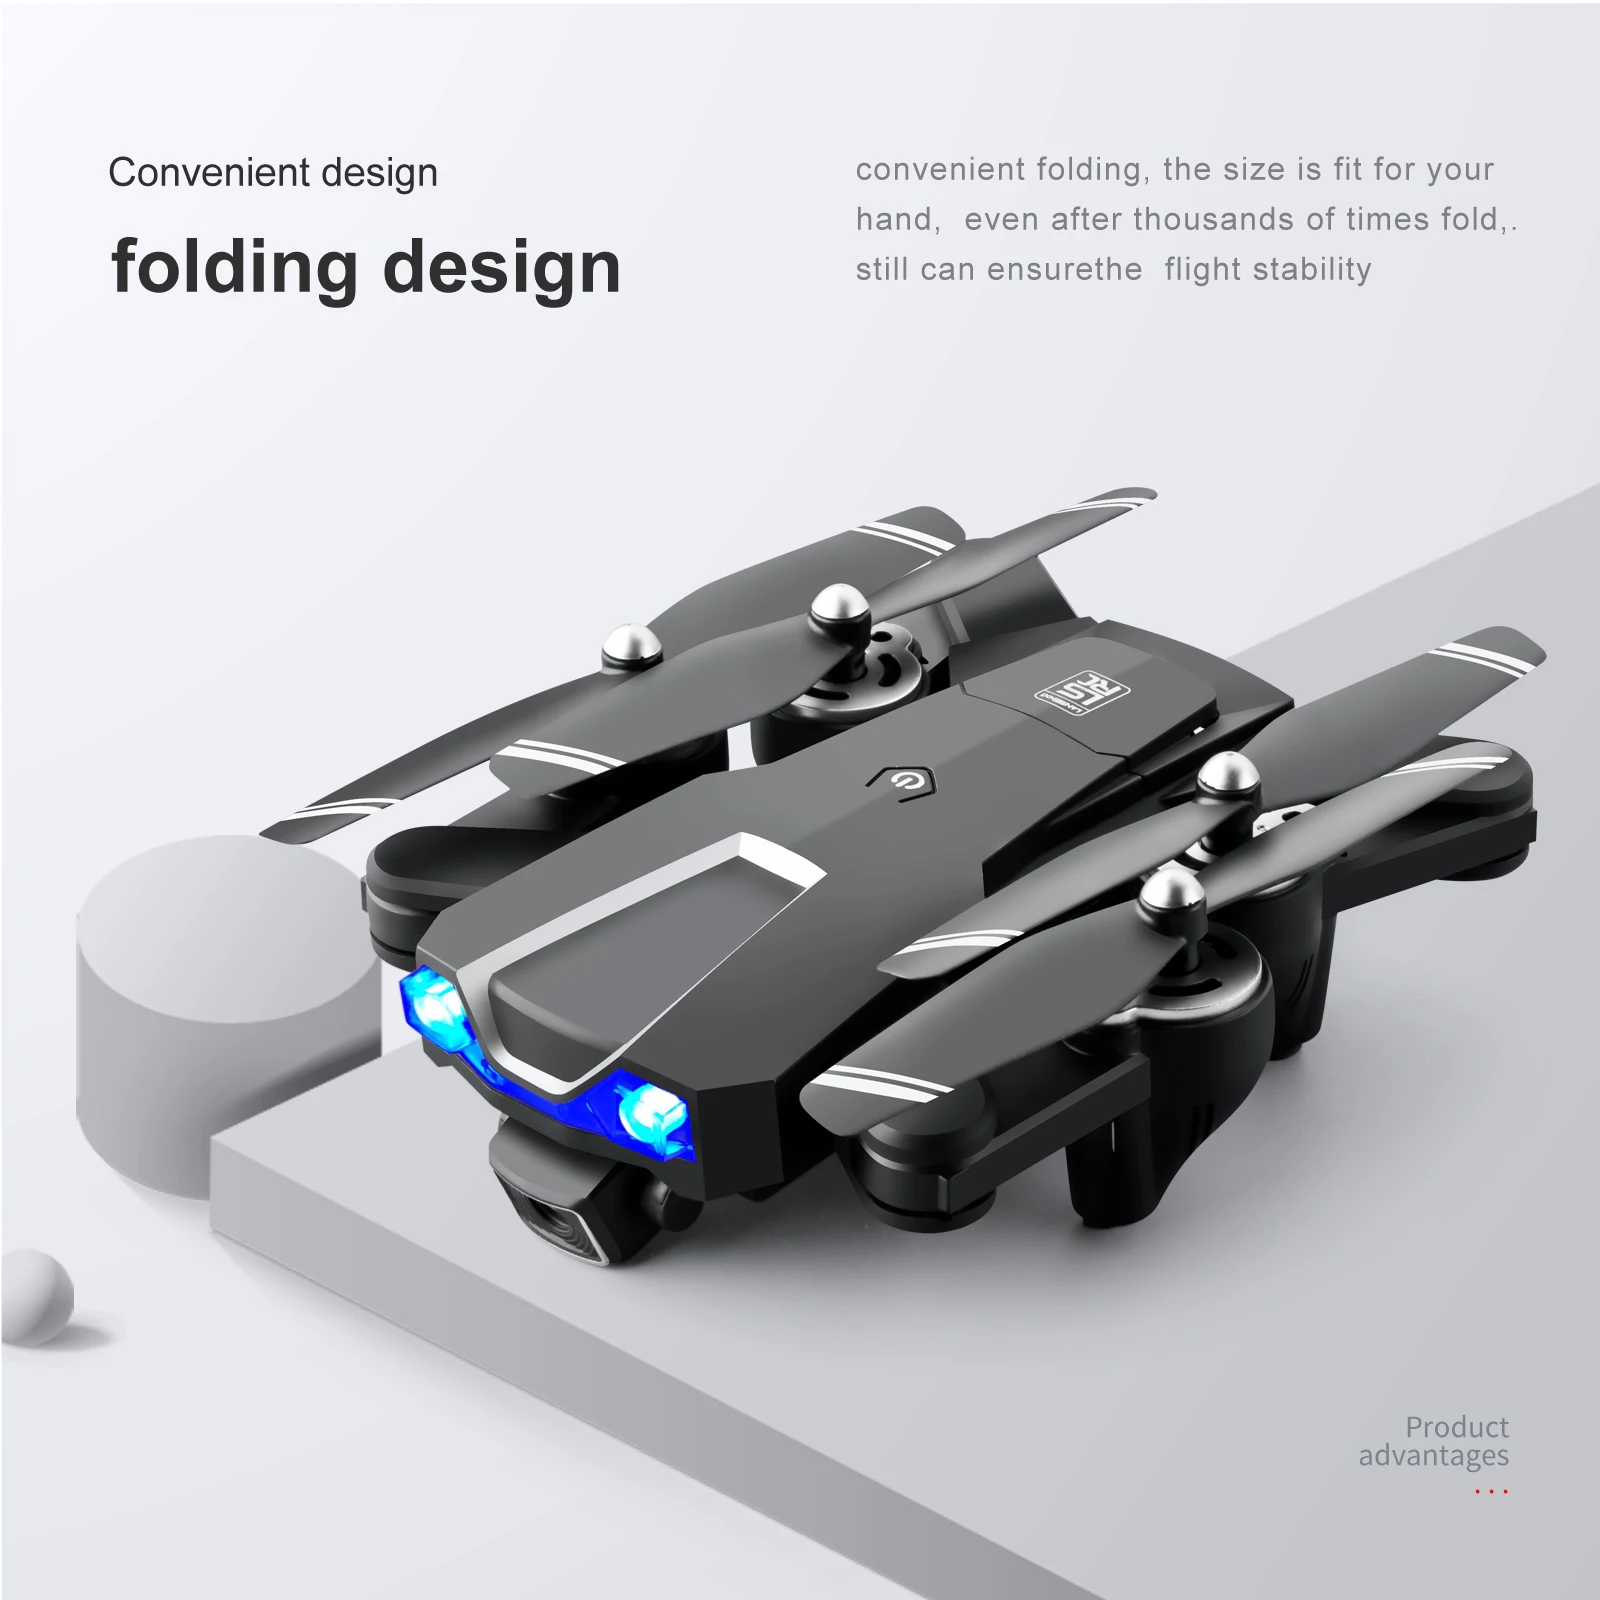 LS25 Drone 6K Profesional HD Dual Camera Quadcopter GPS Optical Flow Wide Angle Foldable Rc Helicopter Wifi 5G Toys Gift 2.4 g remote control quadcopter